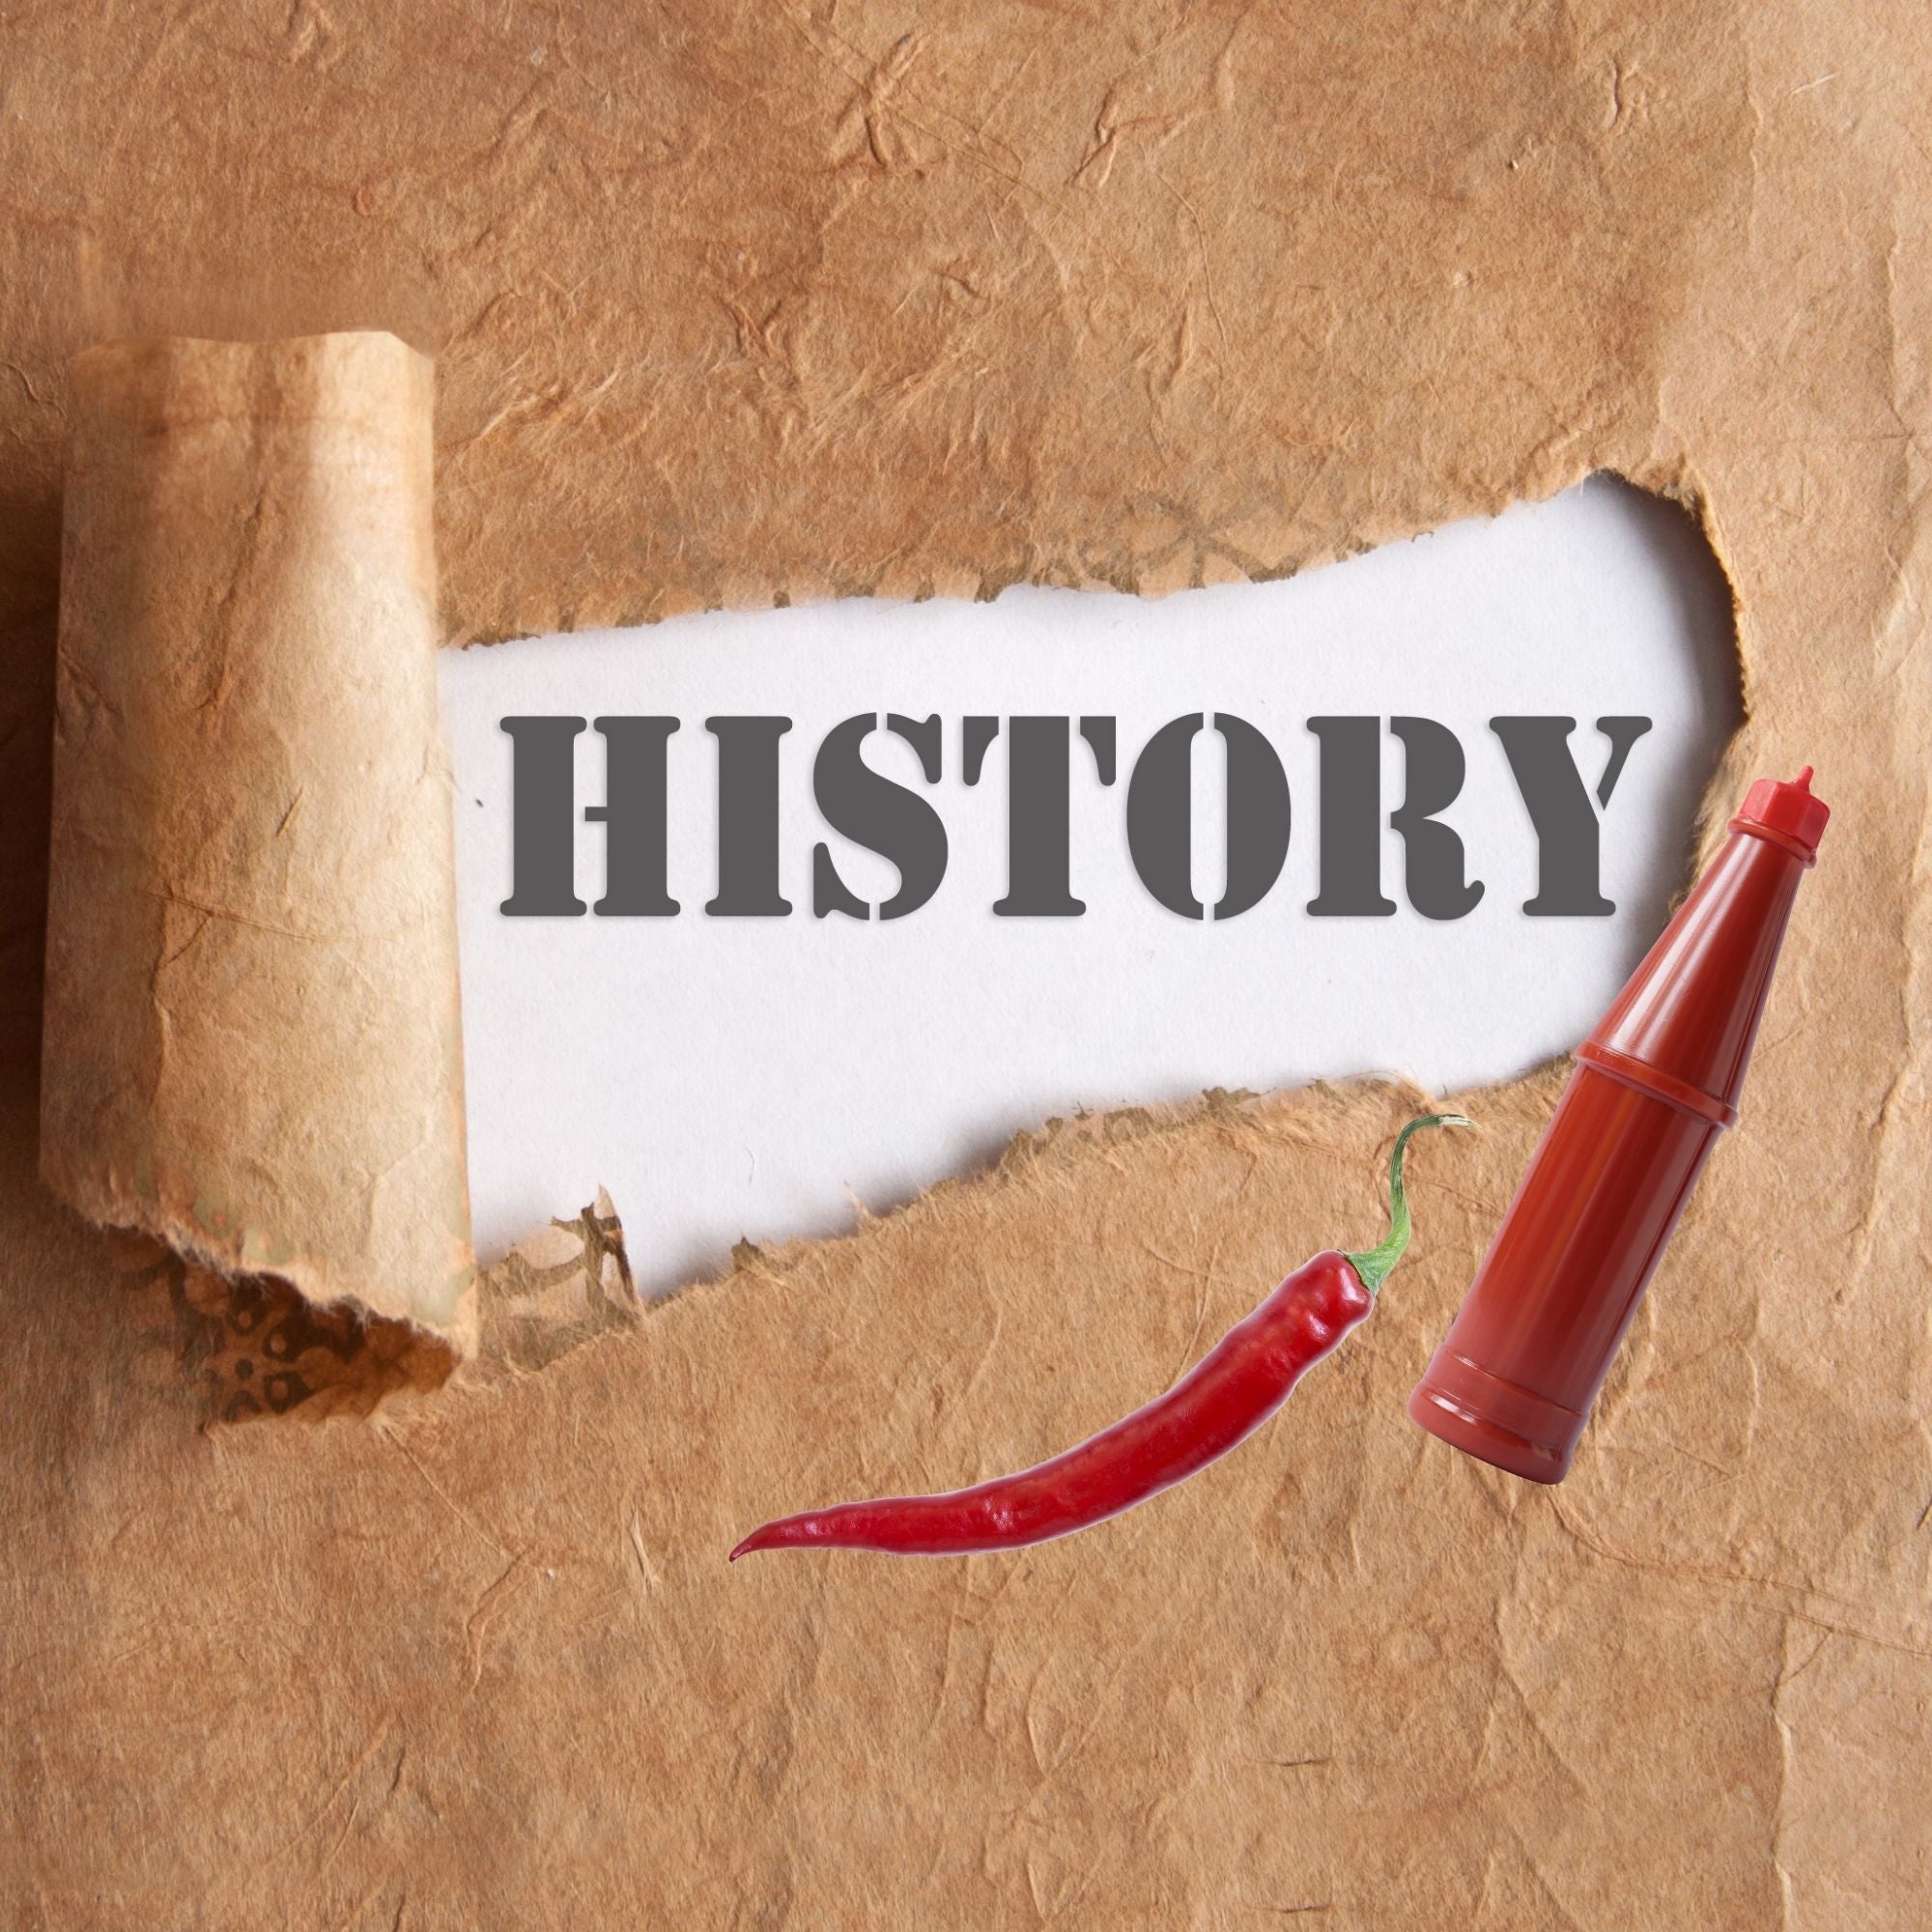 history of hot sauce